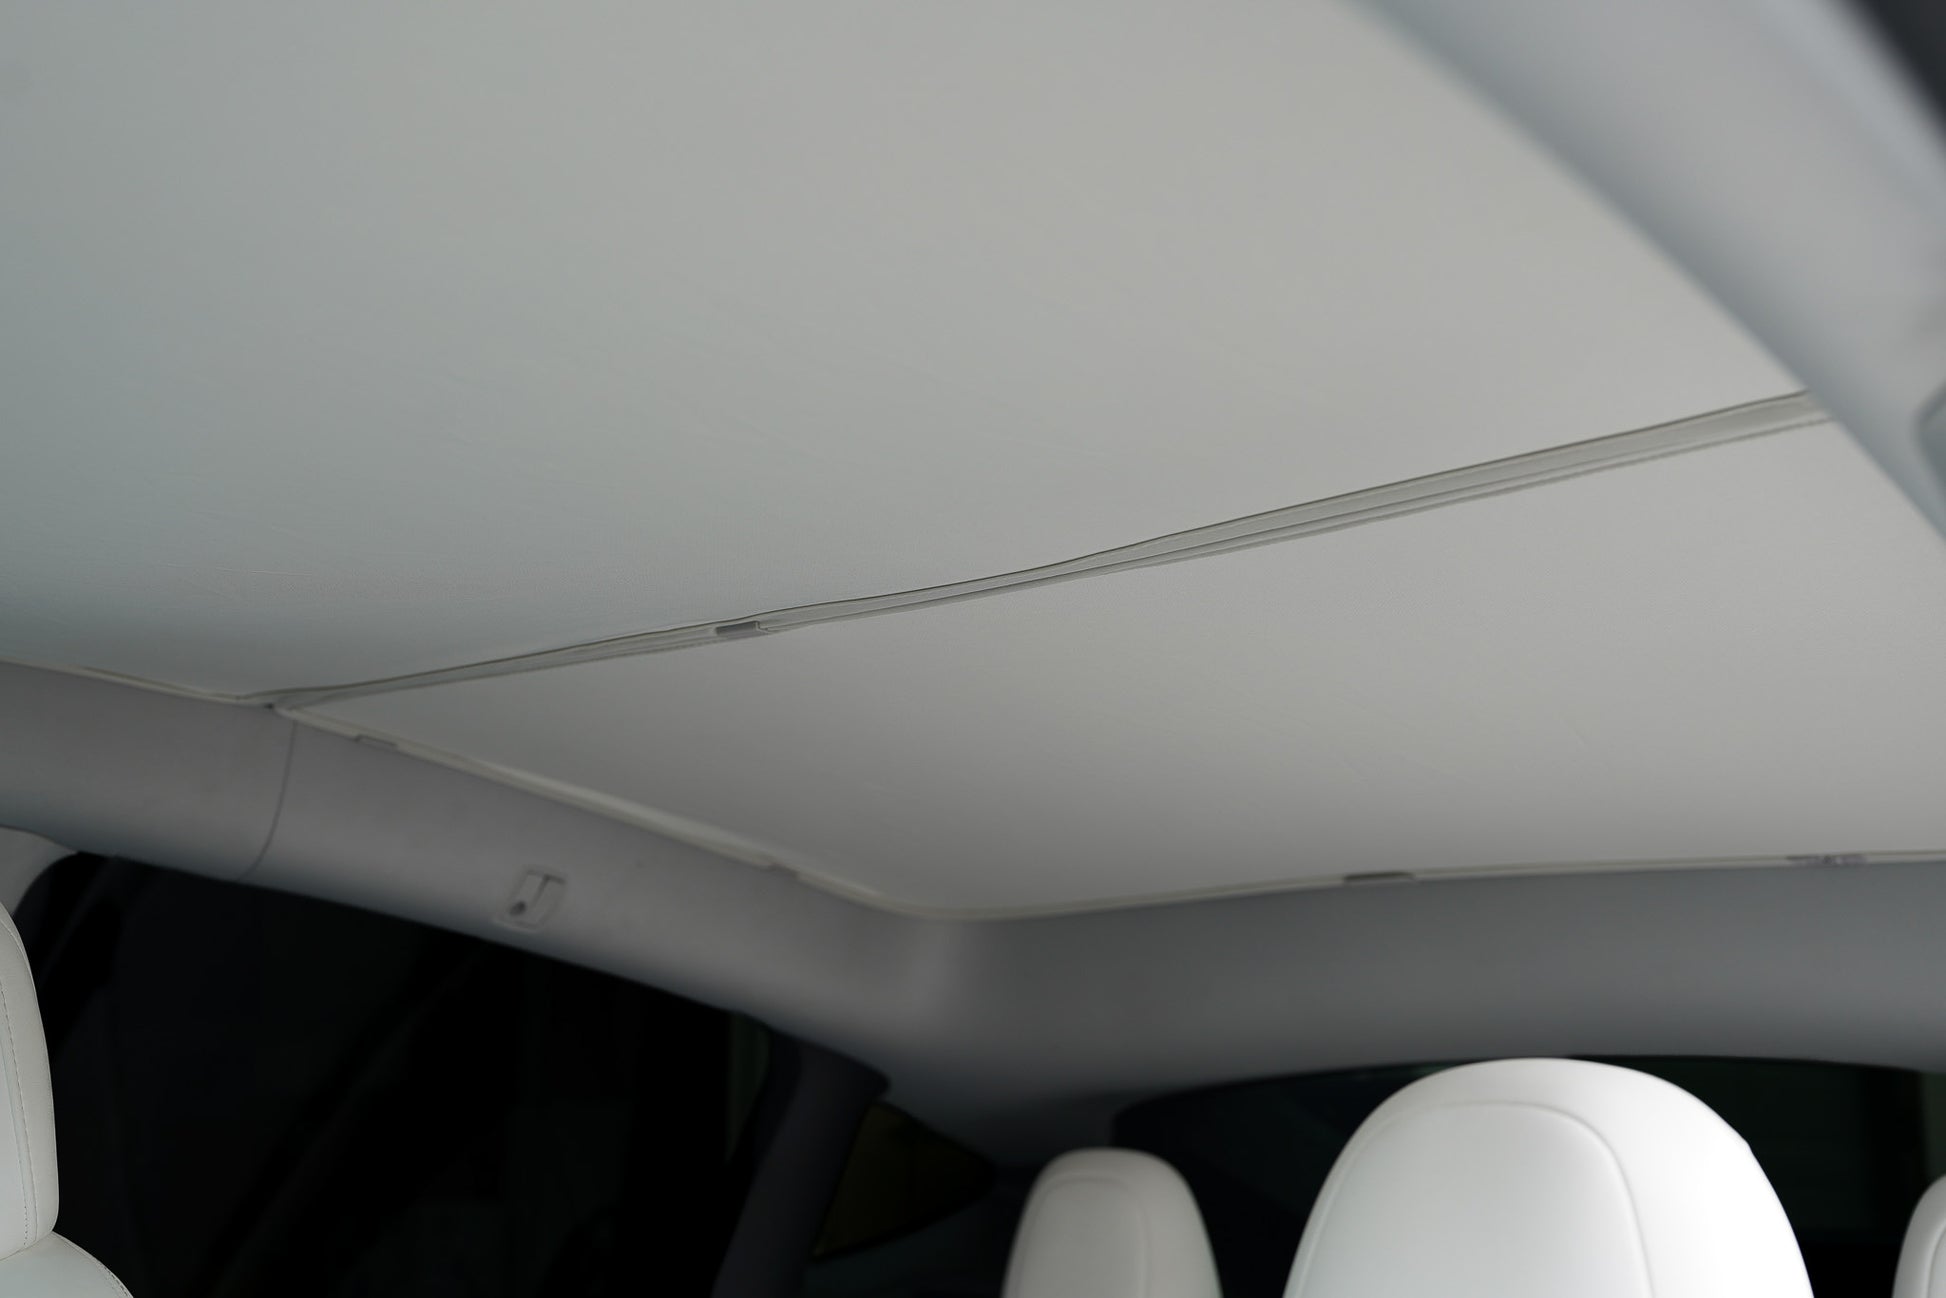 Tesla Model Y Glass Roof Sunshade 2 in 1 Kit (New Version) Available in Black and Beige Color - iCBL